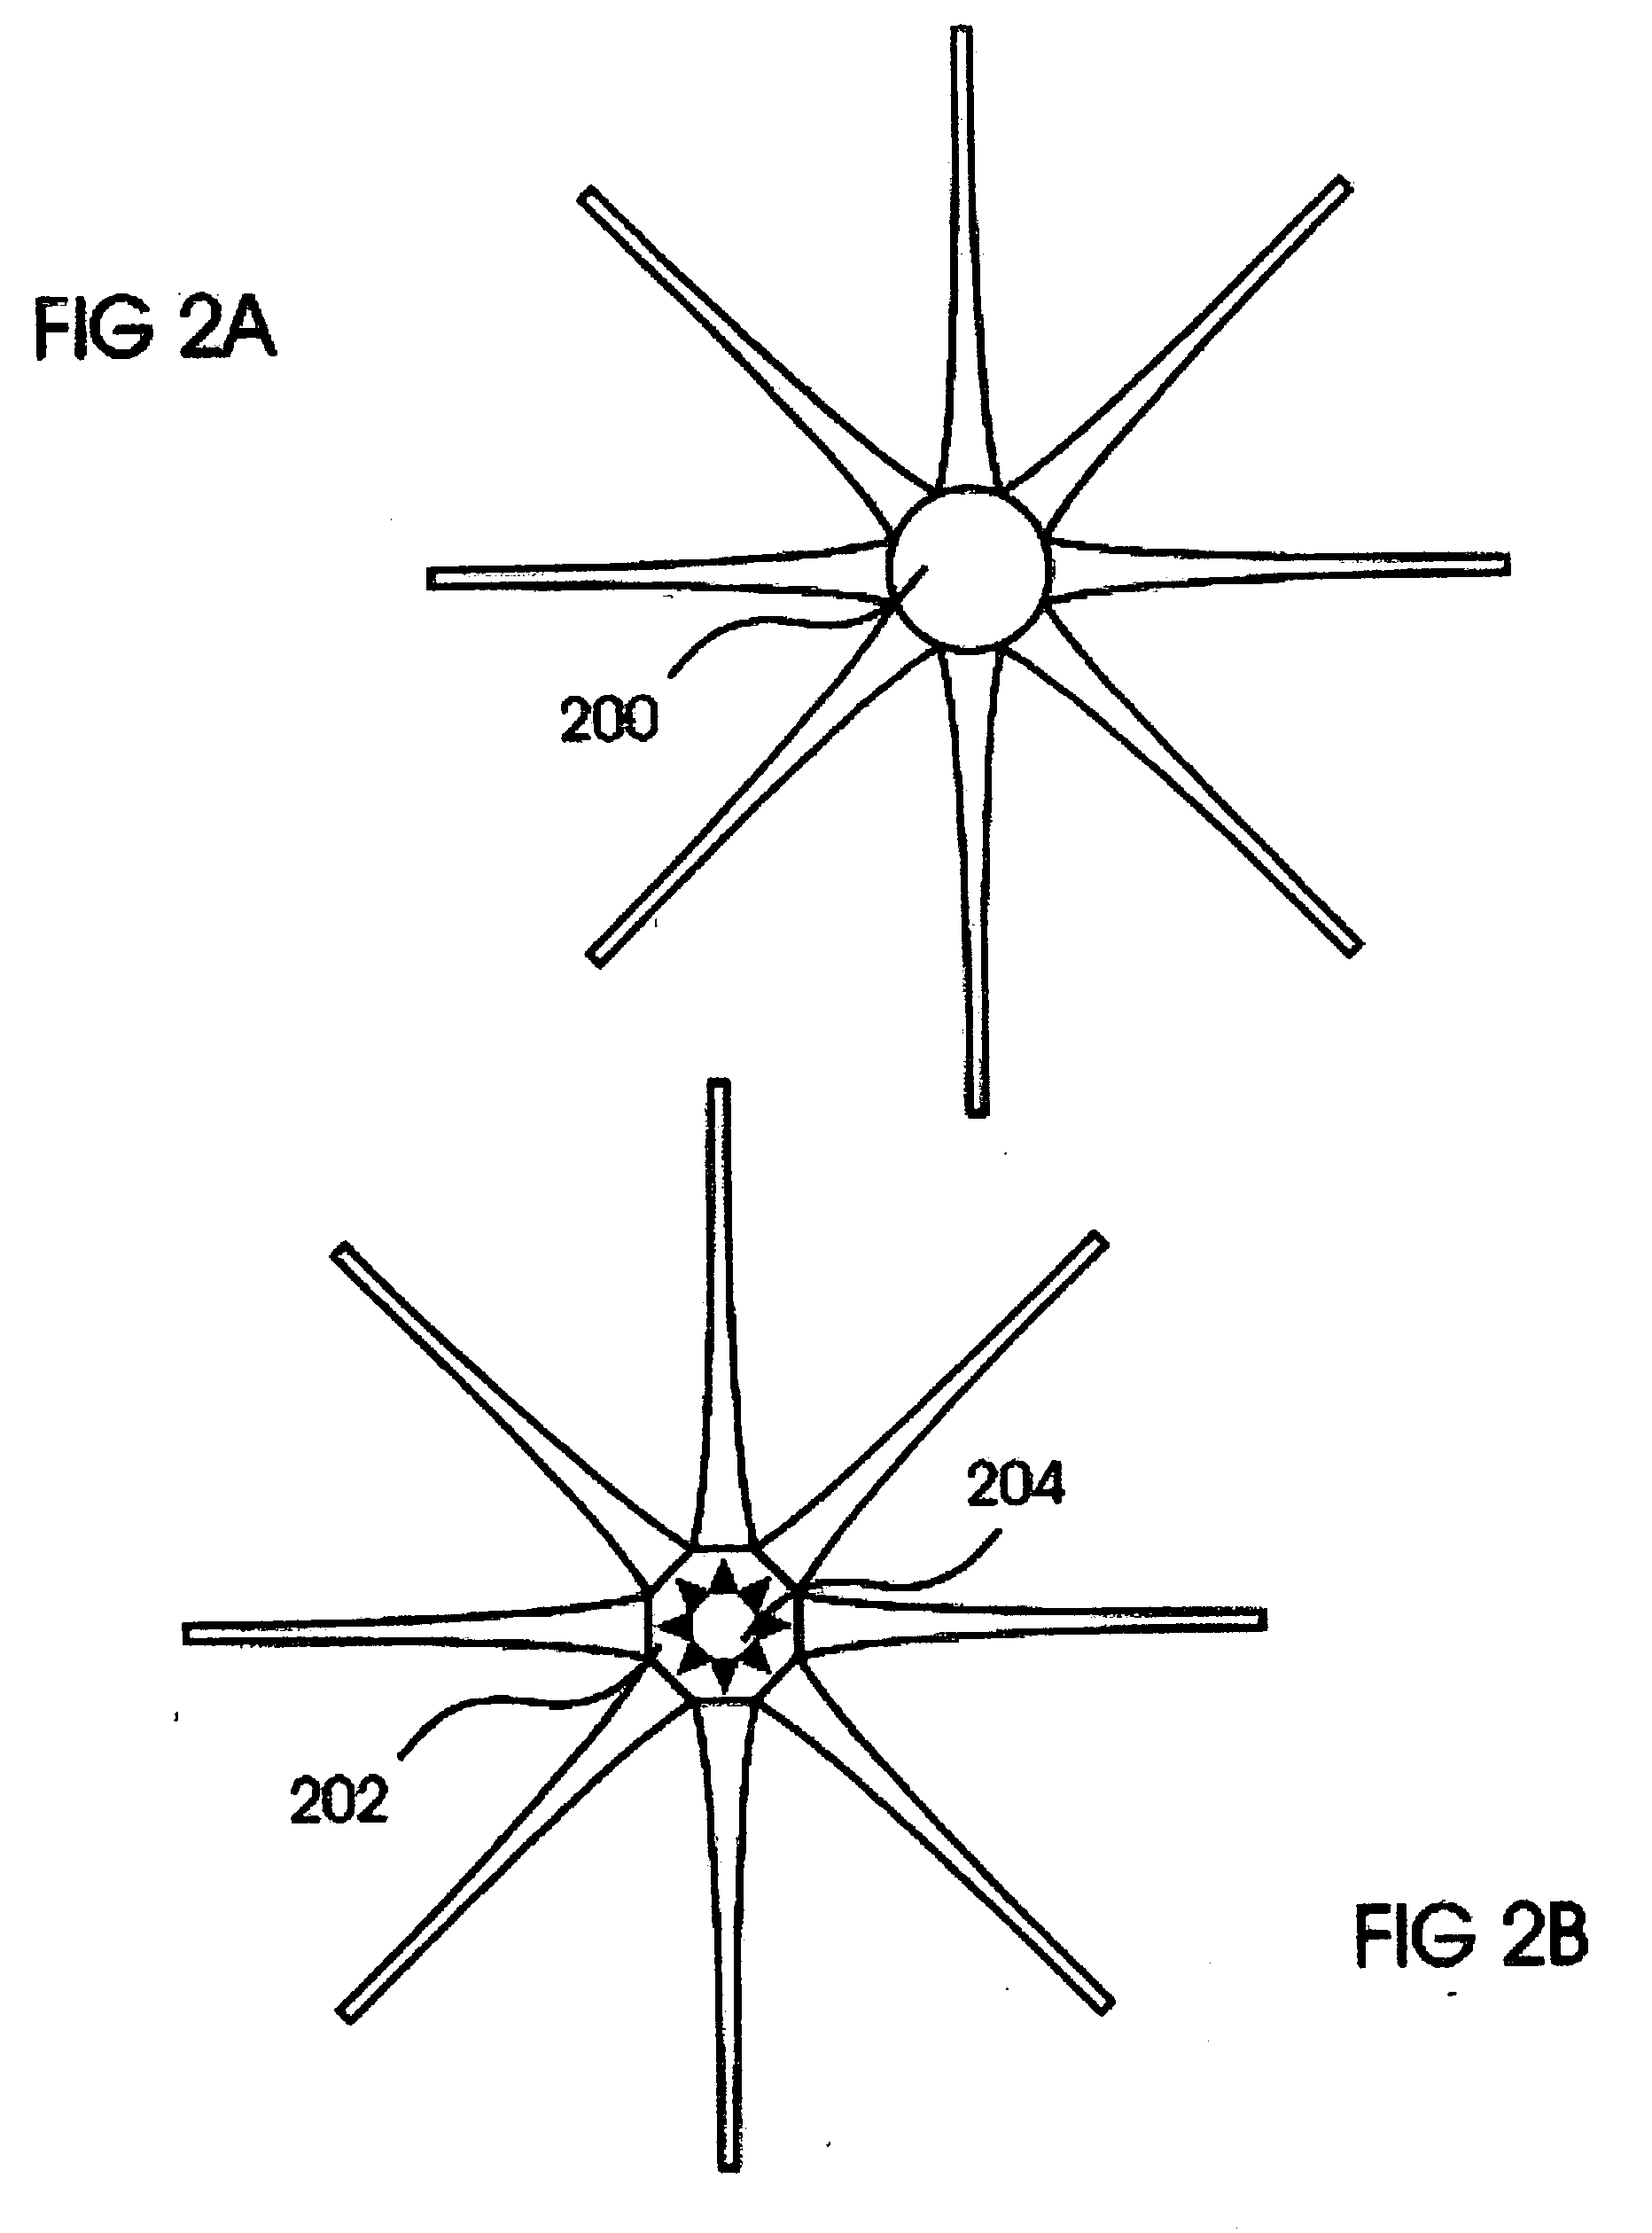 Apparatus and method to facilitate group exercise and movement